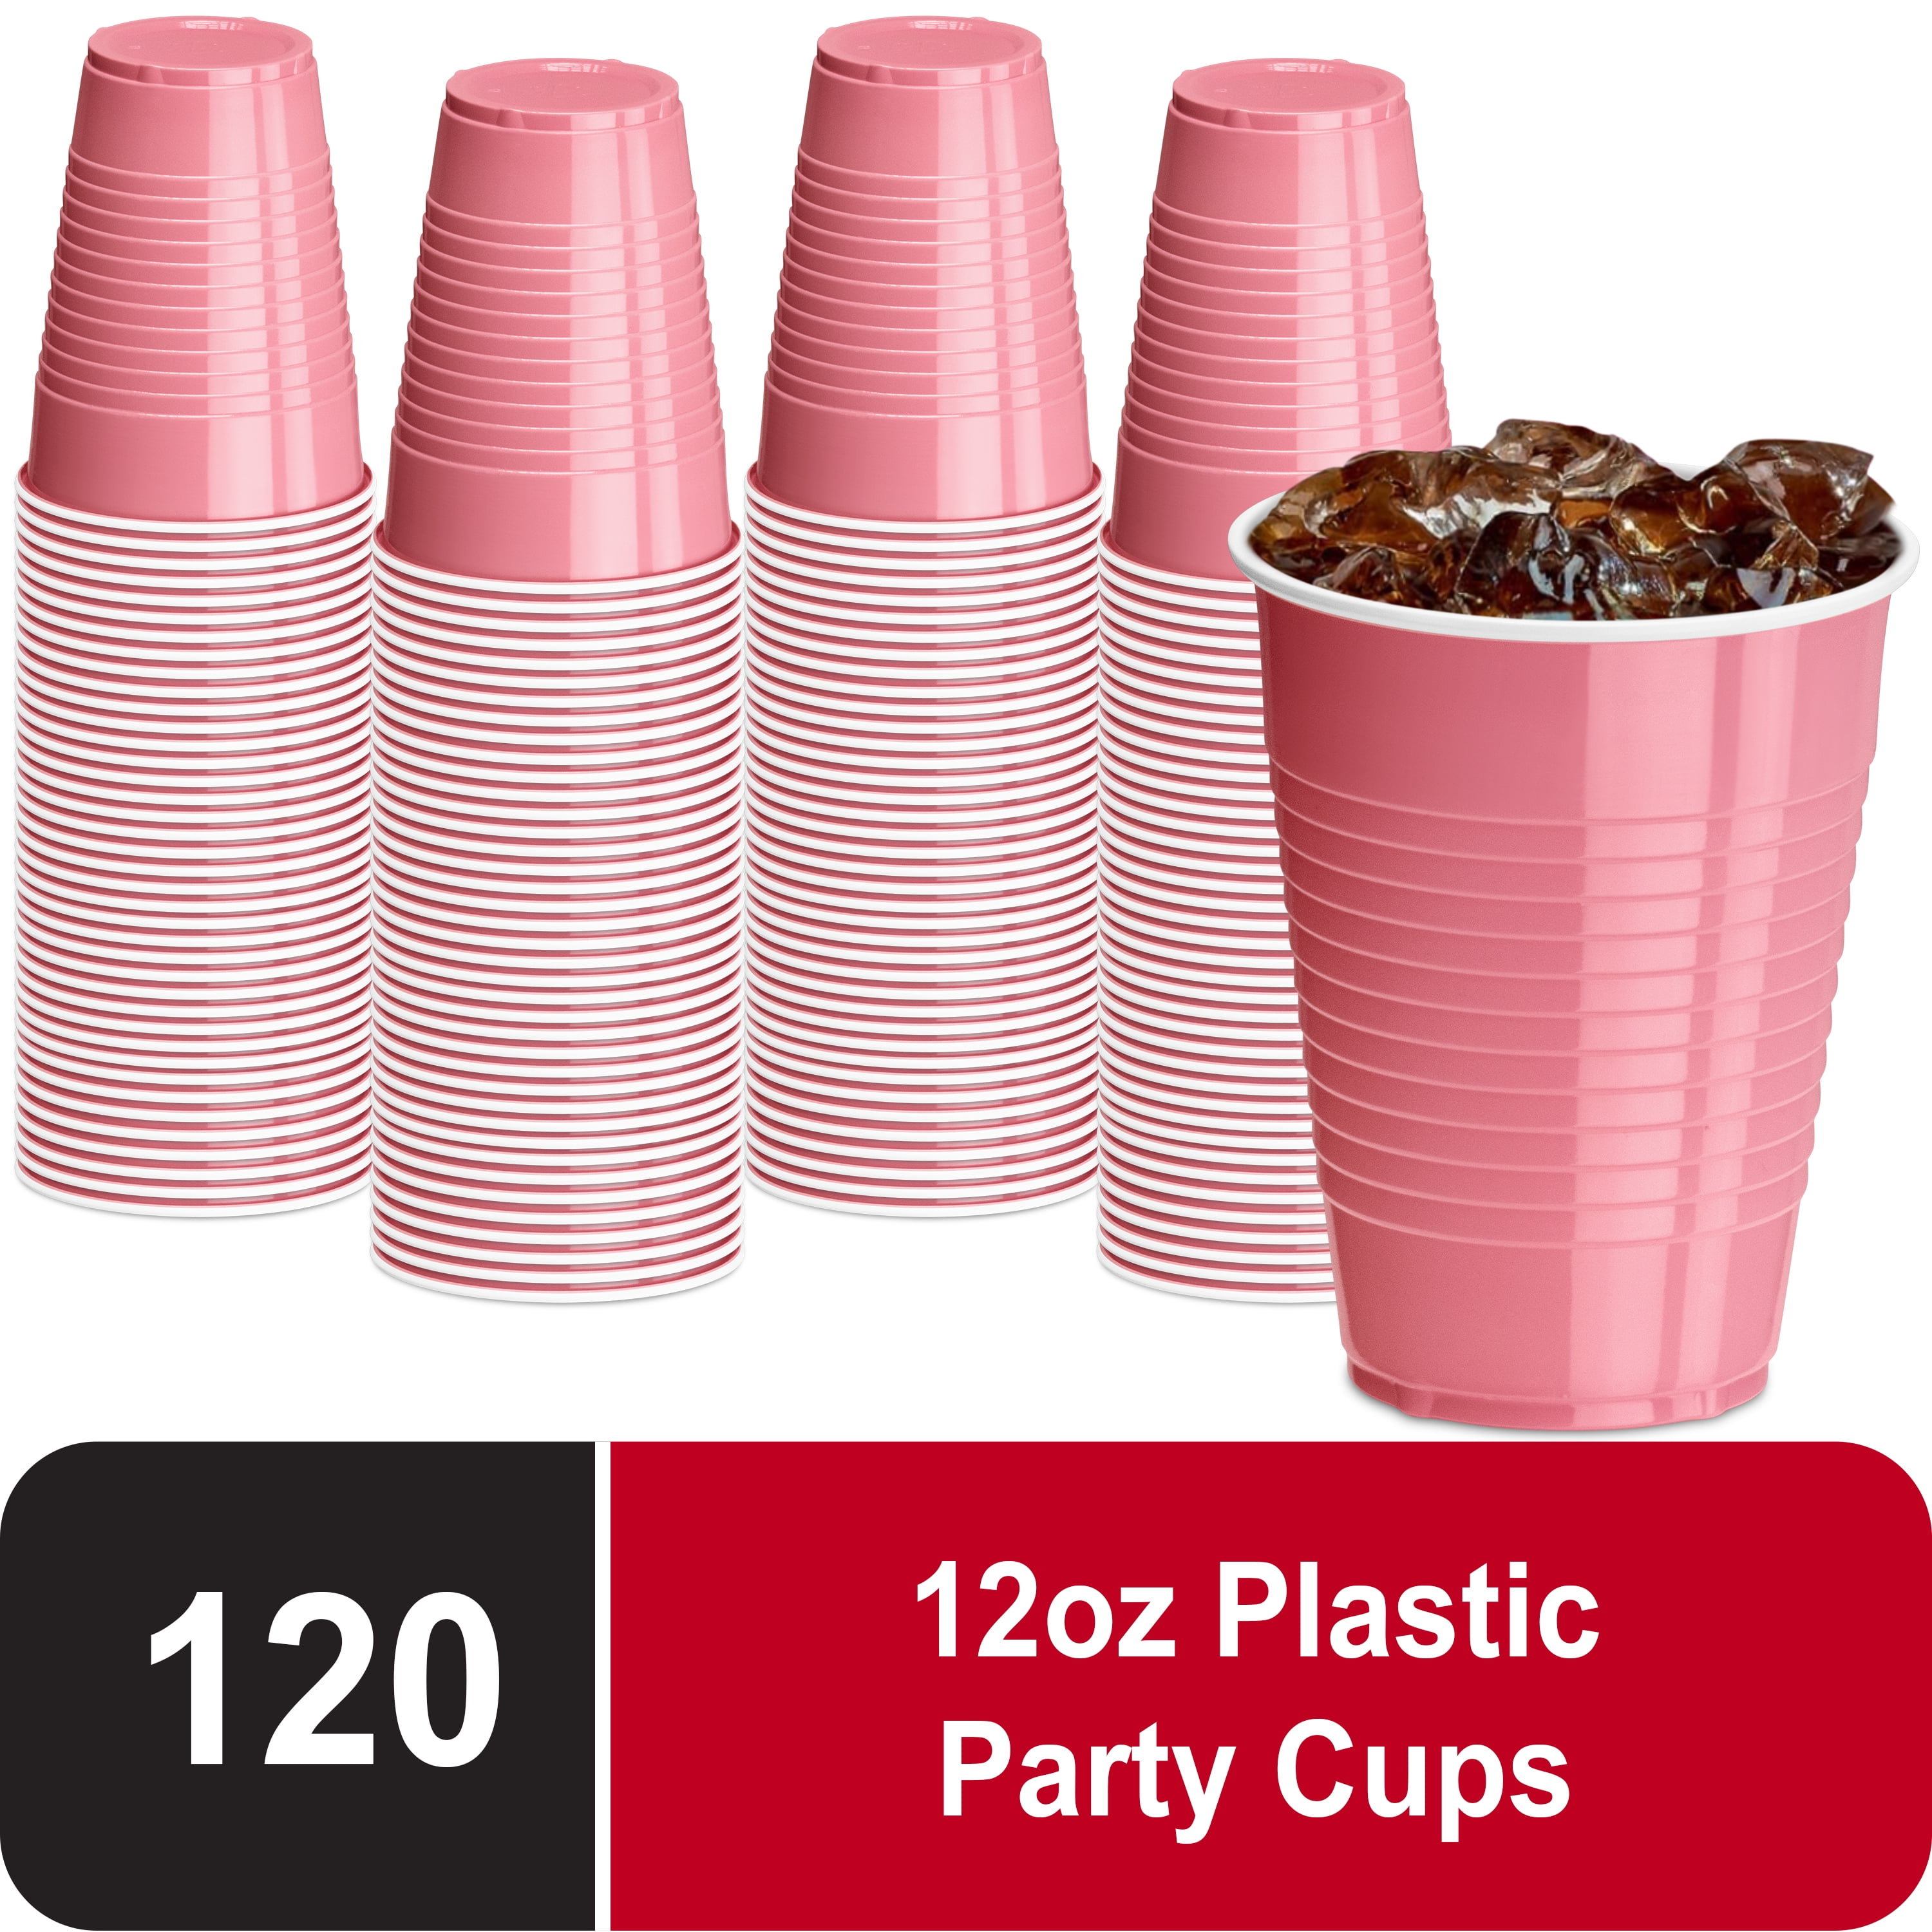 10Pcs Christmas Plastic Cups,12oz Reusable Party Cups for Xmas Events,  Unique Element Design Ideal Birthday Gift Party Supplies - AliExpress